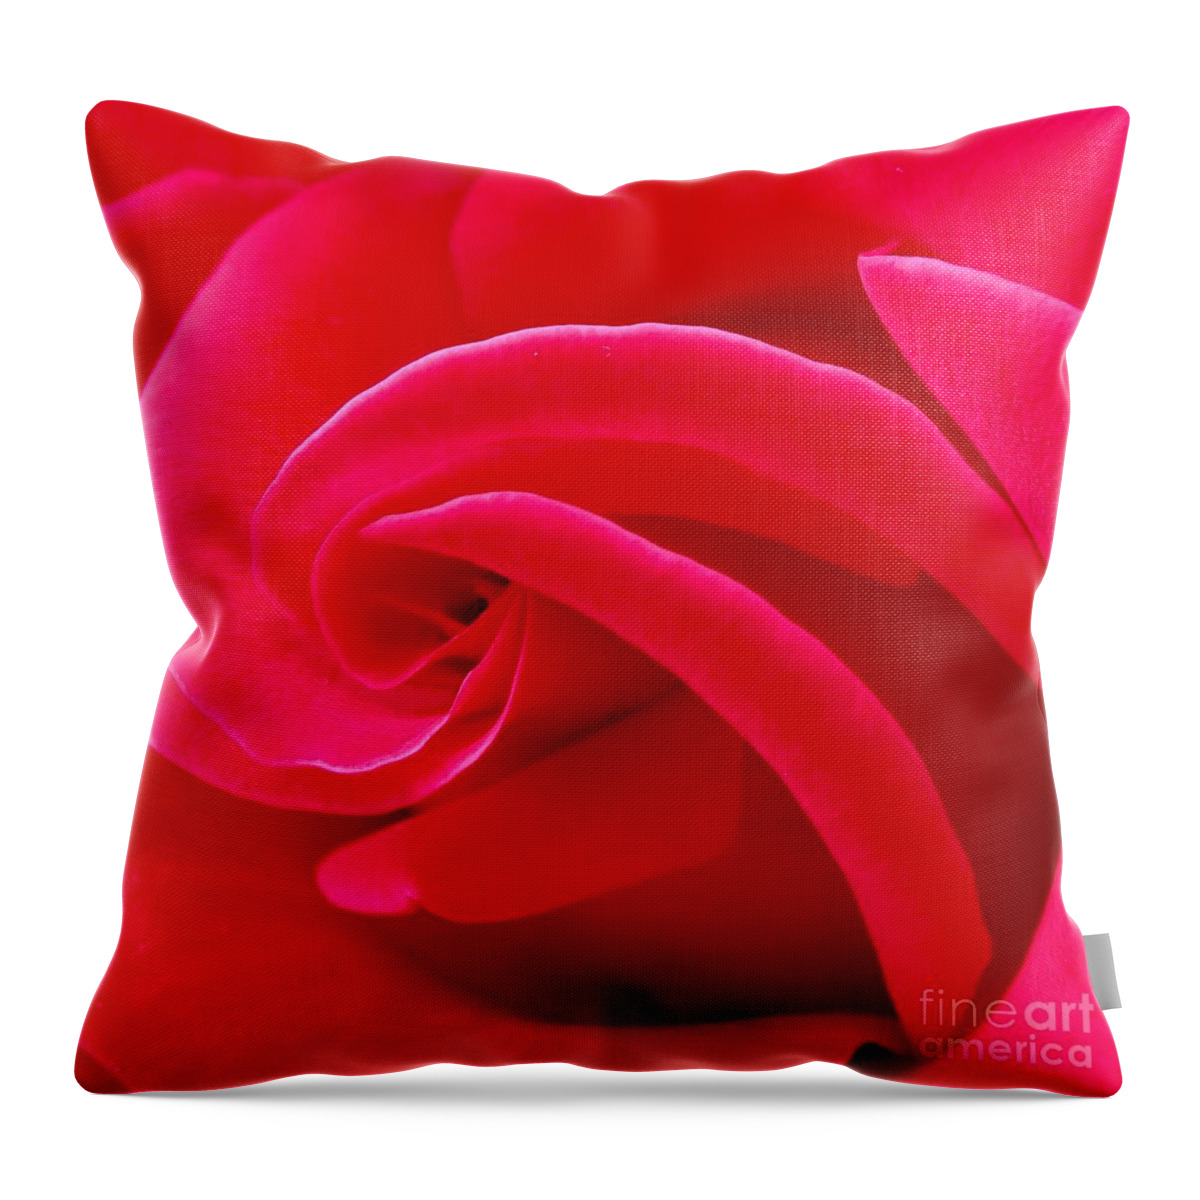 Dolly Parton Rose Throw Pillow featuring the photograph Dolly Parton's Red Rose by Scott Cameron